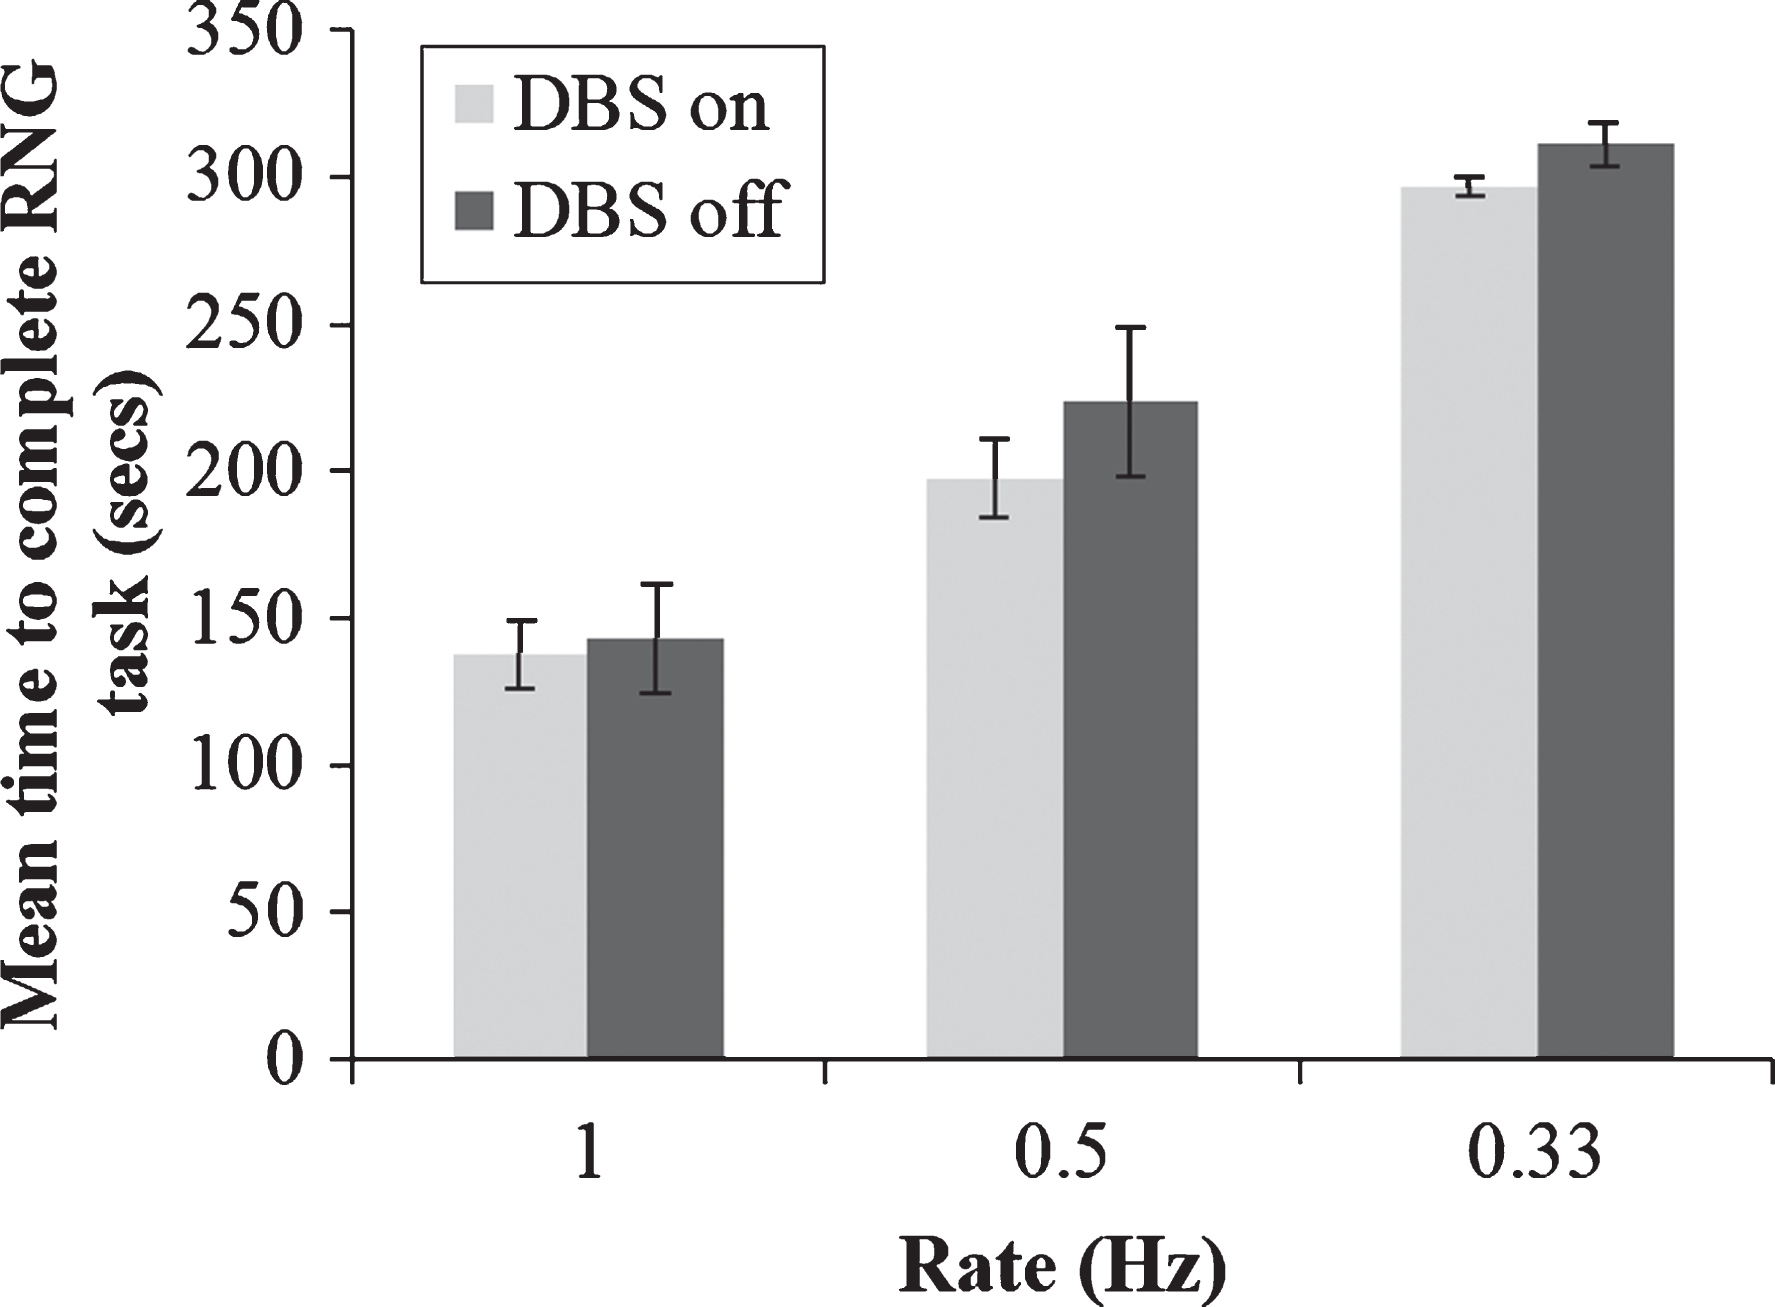 Mean total time taken to generate 100 numbers during paced random number generation with deep brain stimulation (DBS) of the subthalamic nucleus on or off and at the three rates of the pacing stimulus. Error bars are standard error.